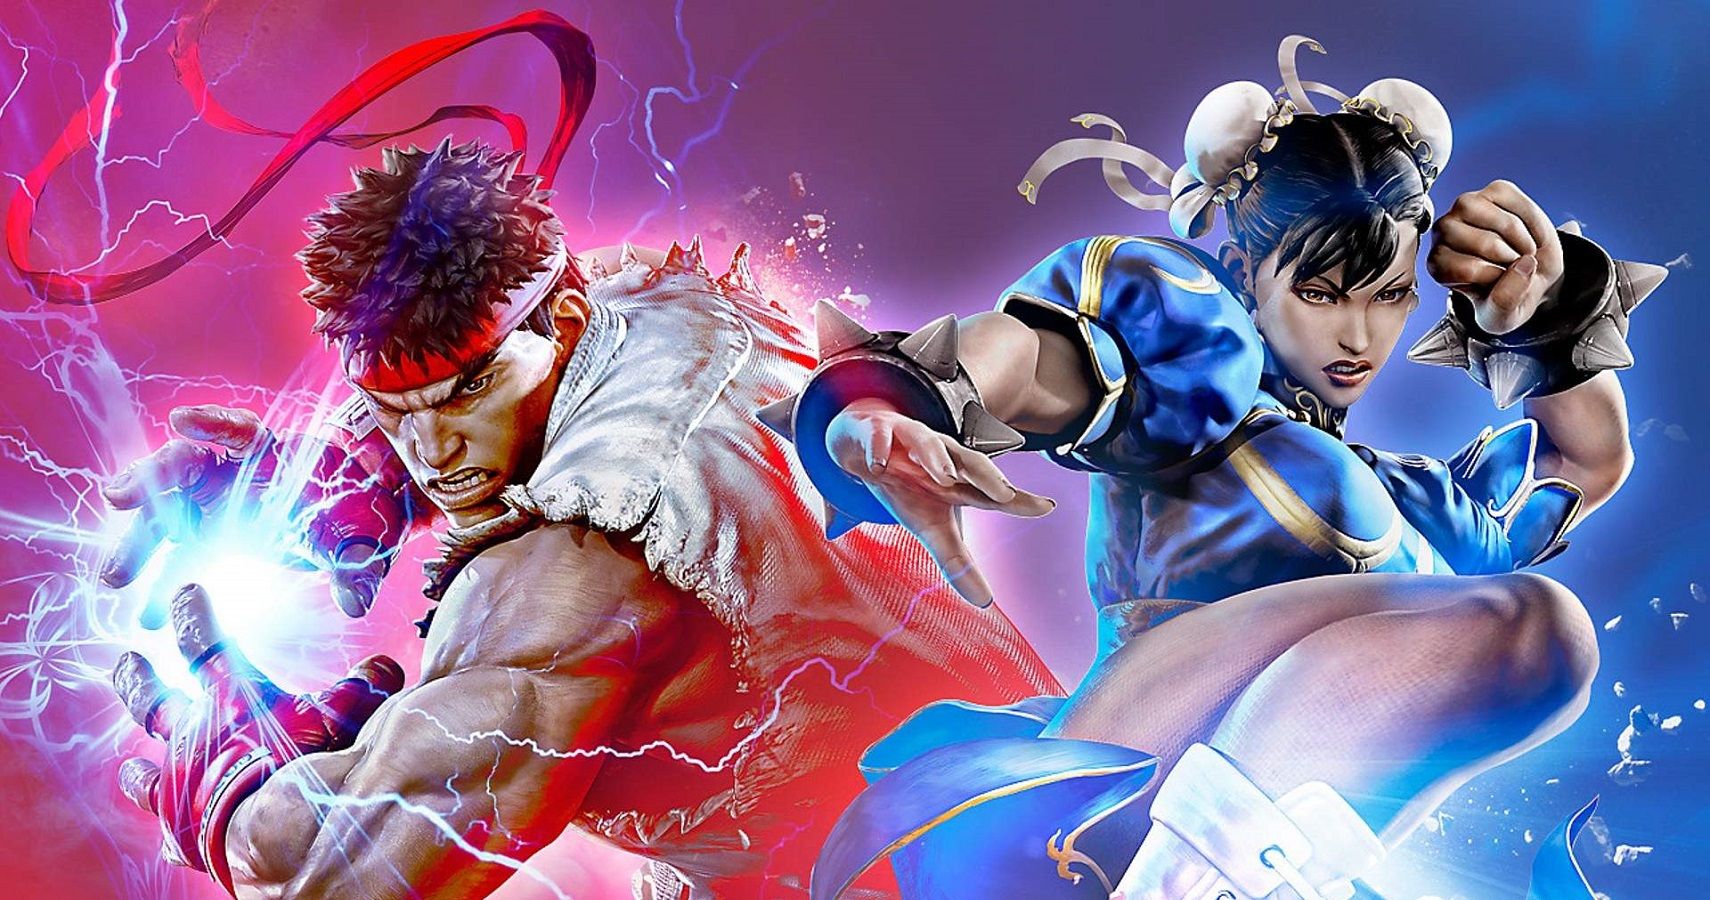 Mirror Mode The Next Street Fighter Game Should Be About Breaking Up Street Fights